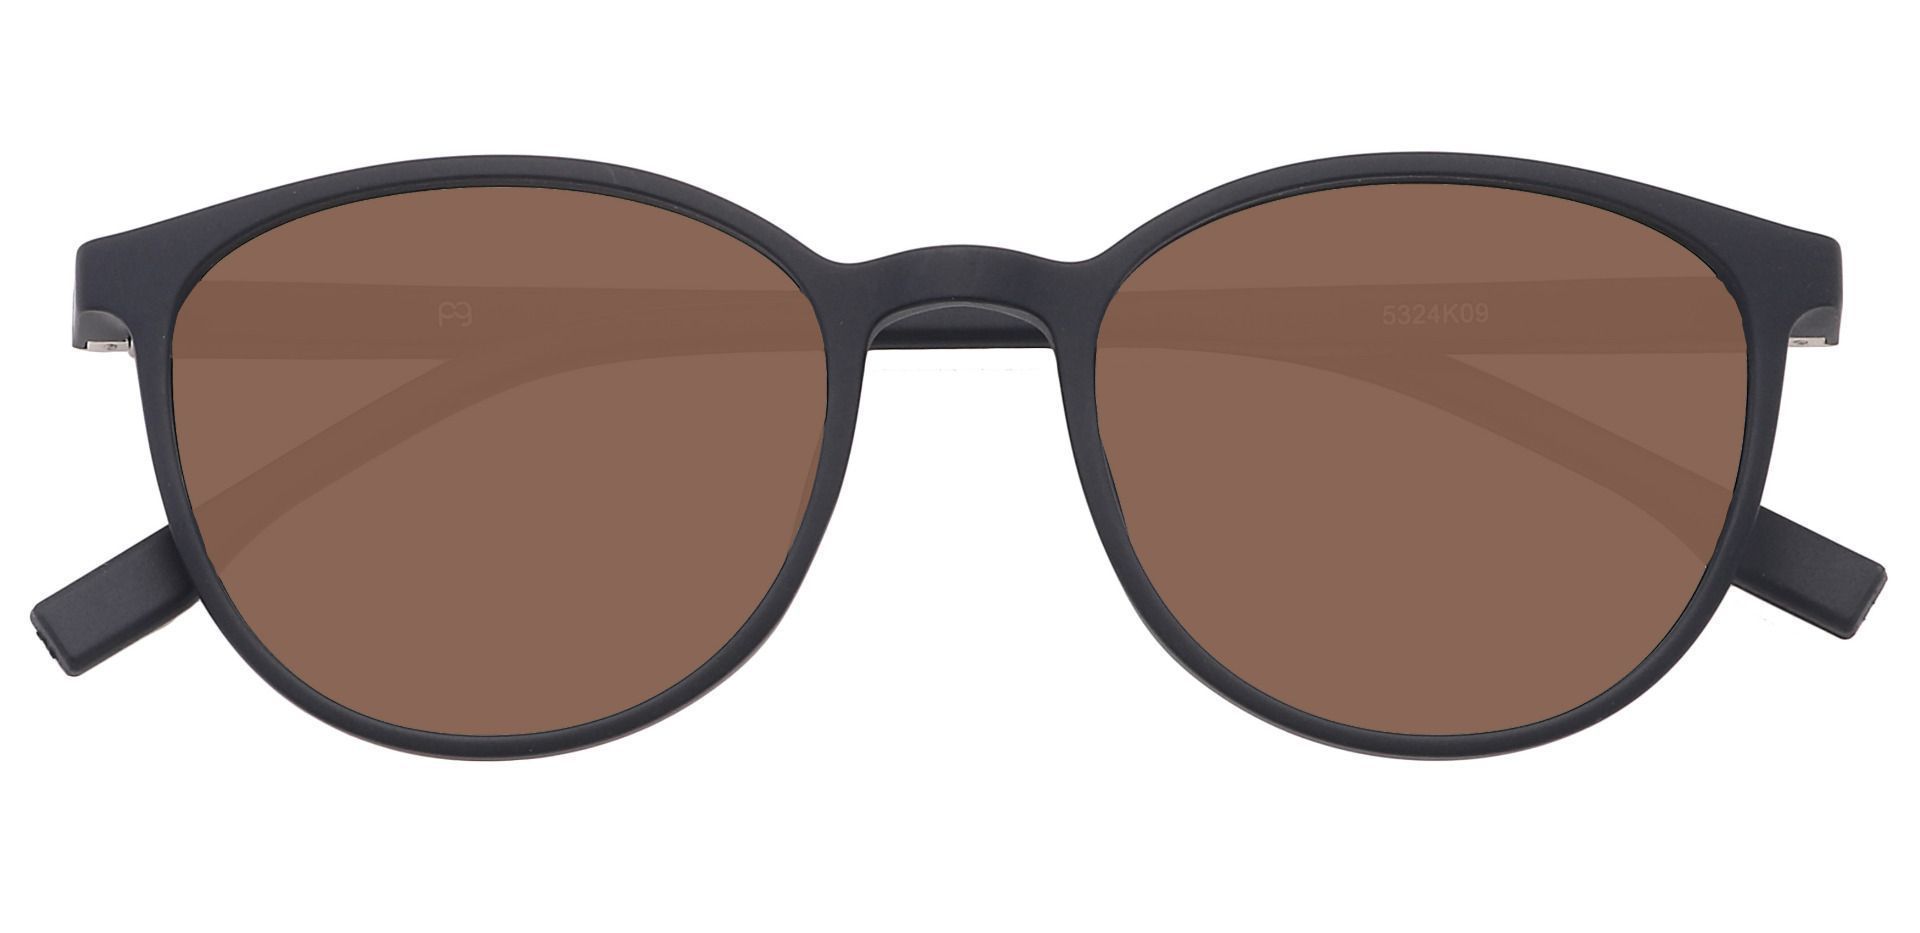 Bay Round Reading Sunglasses - Black Frame With Brown Lenses